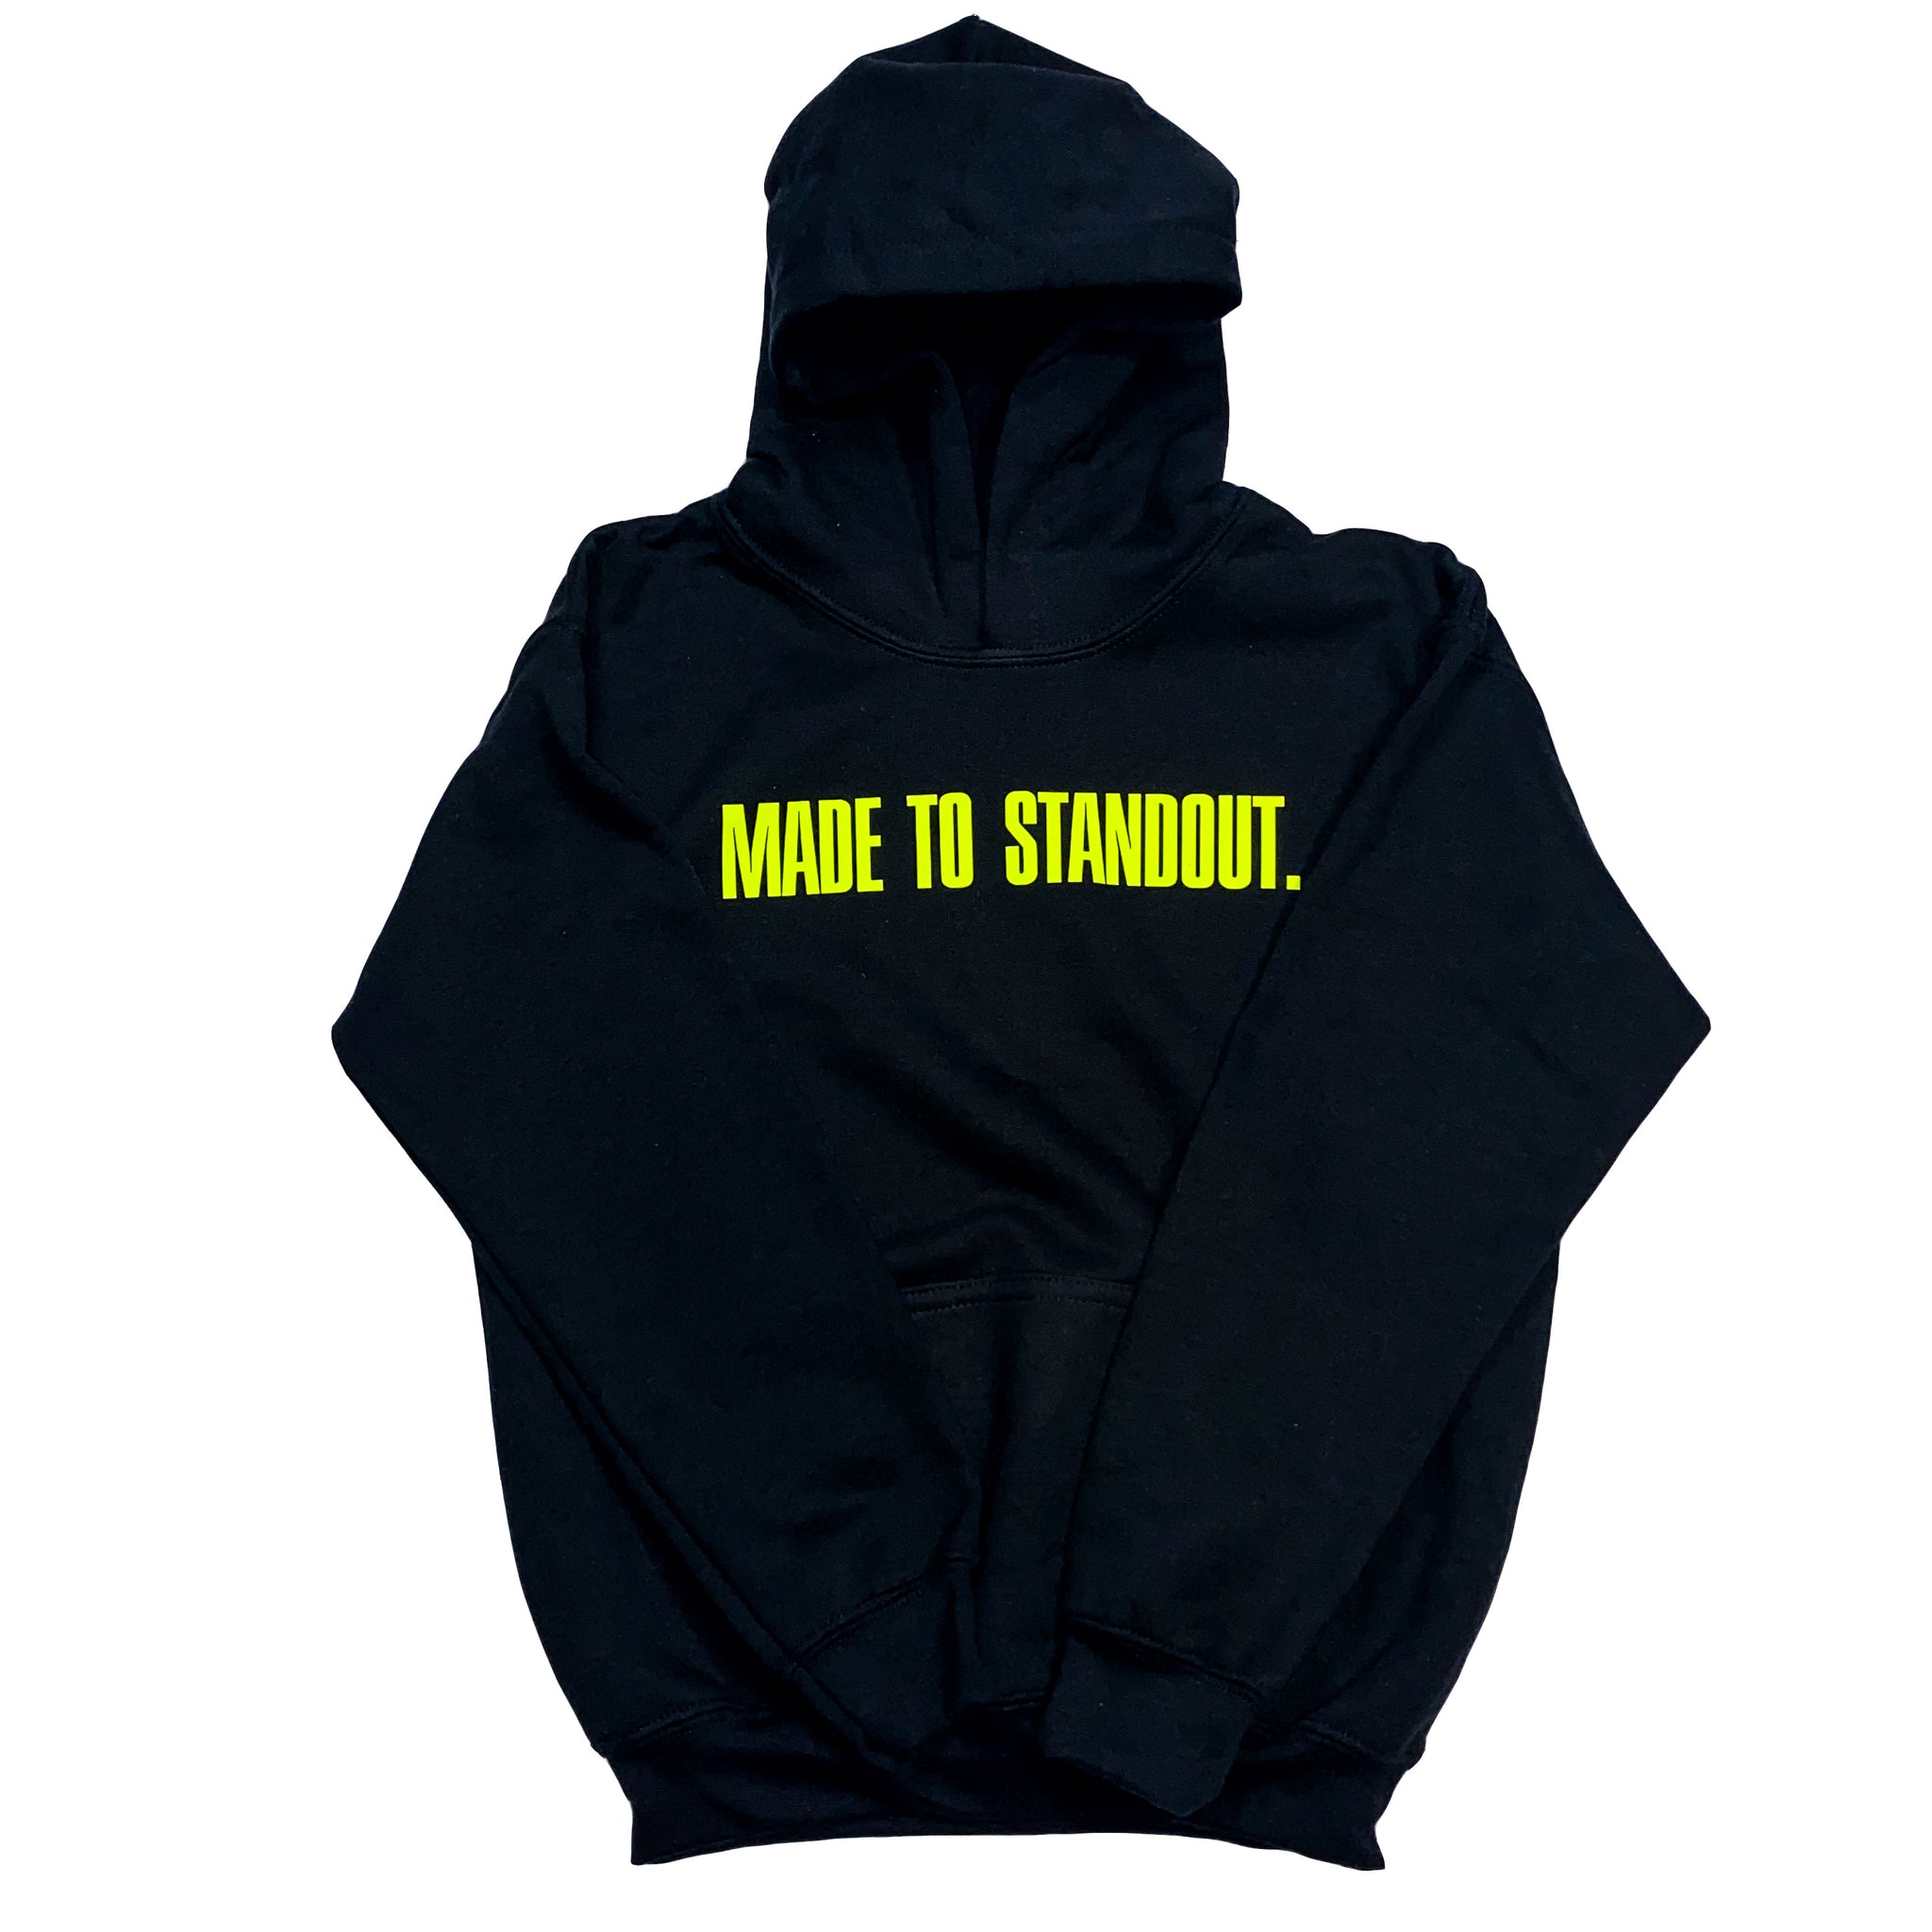 Youth Classic Hoodie - Black/Neon